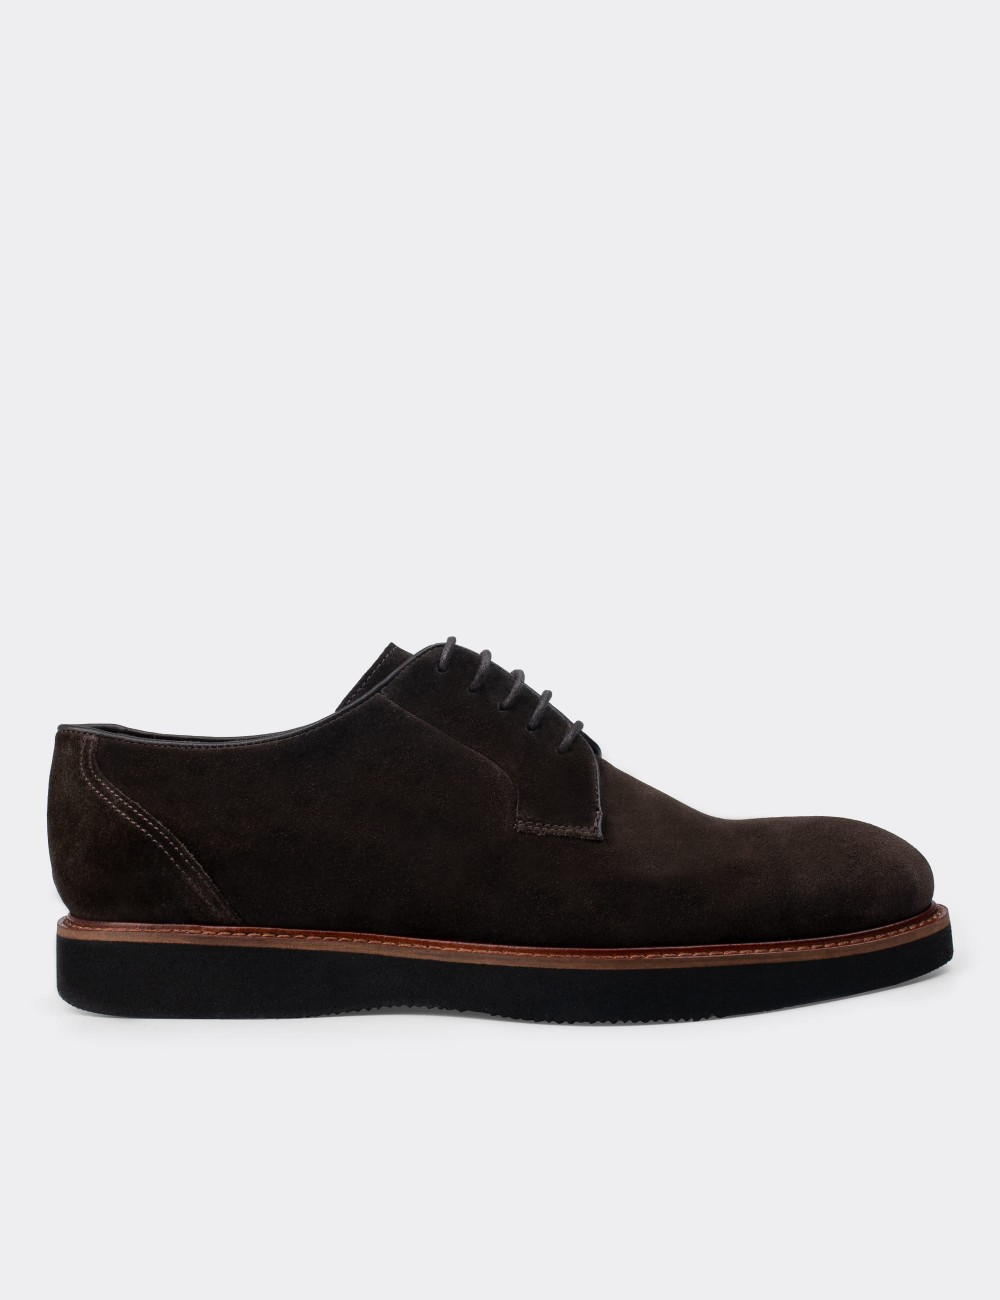 Brown Suede Leather Lace-up Shoes - 01090MKHVE15